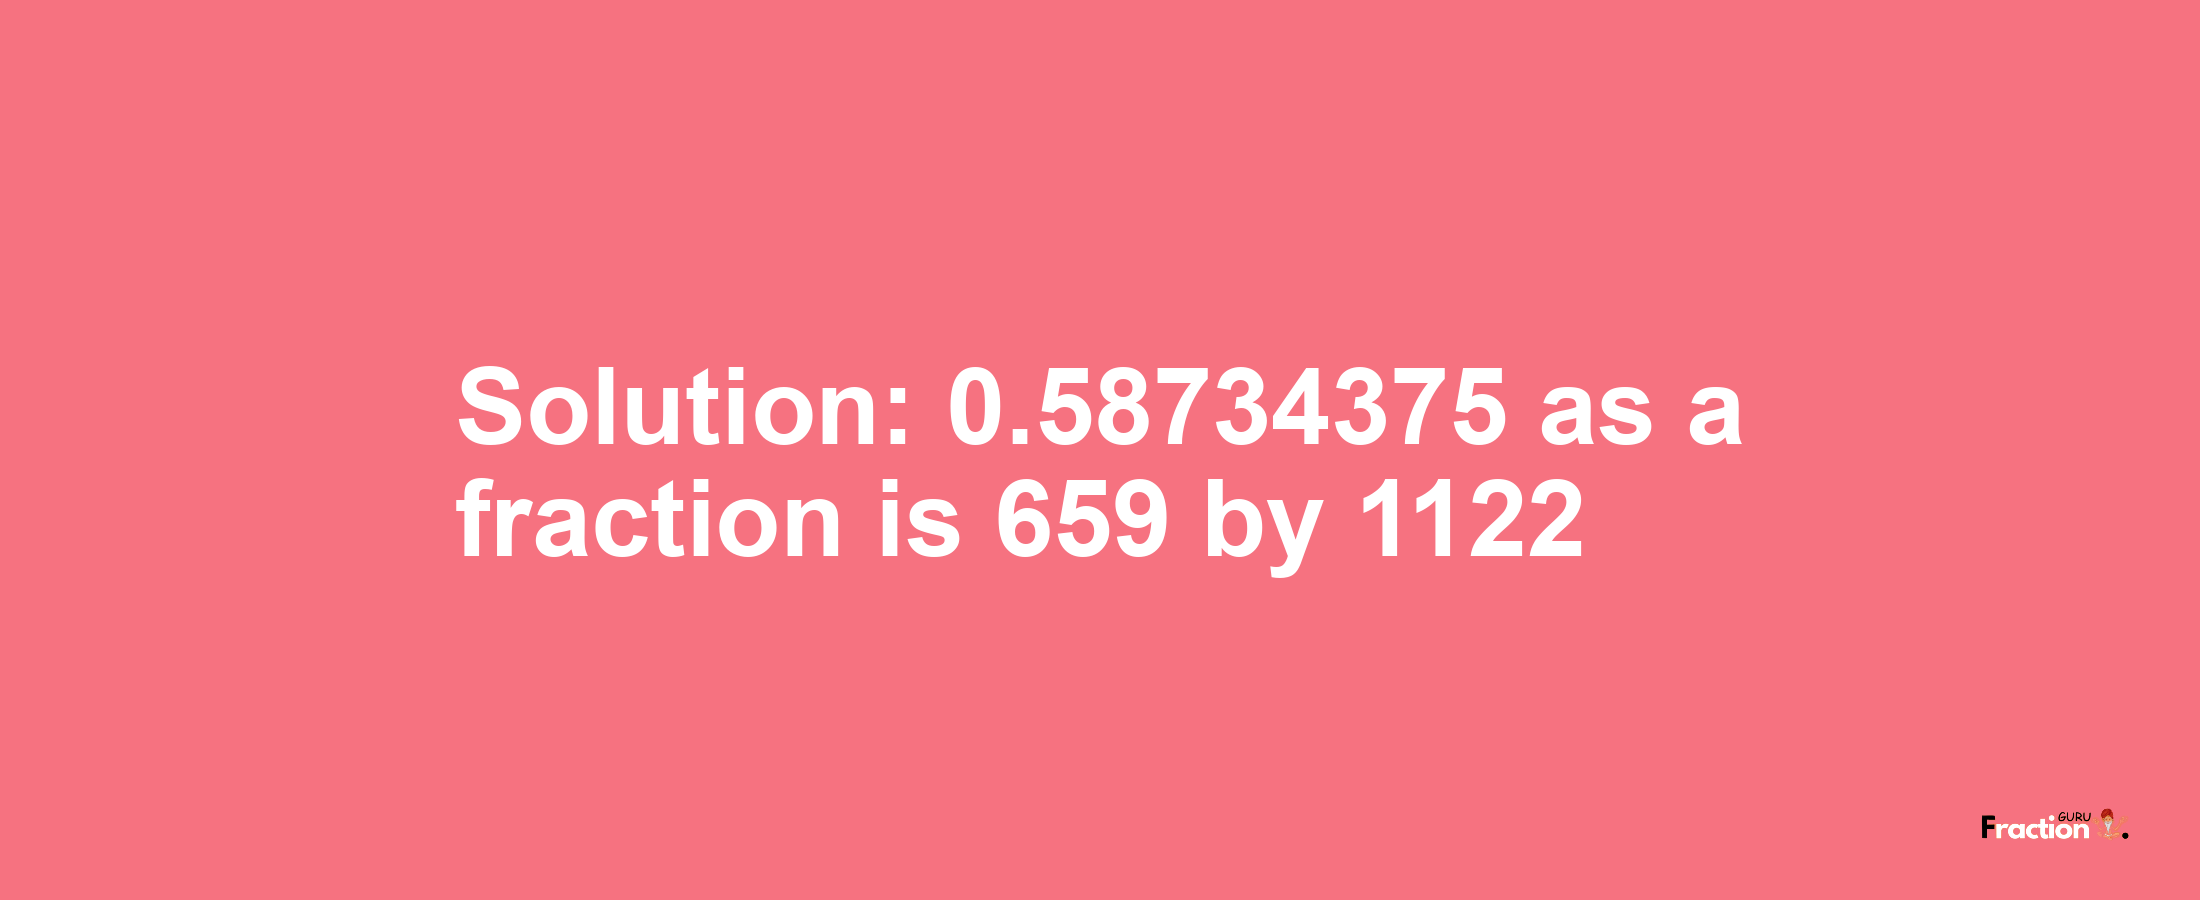 Solution:0.58734375 as a fraction is 659/1122